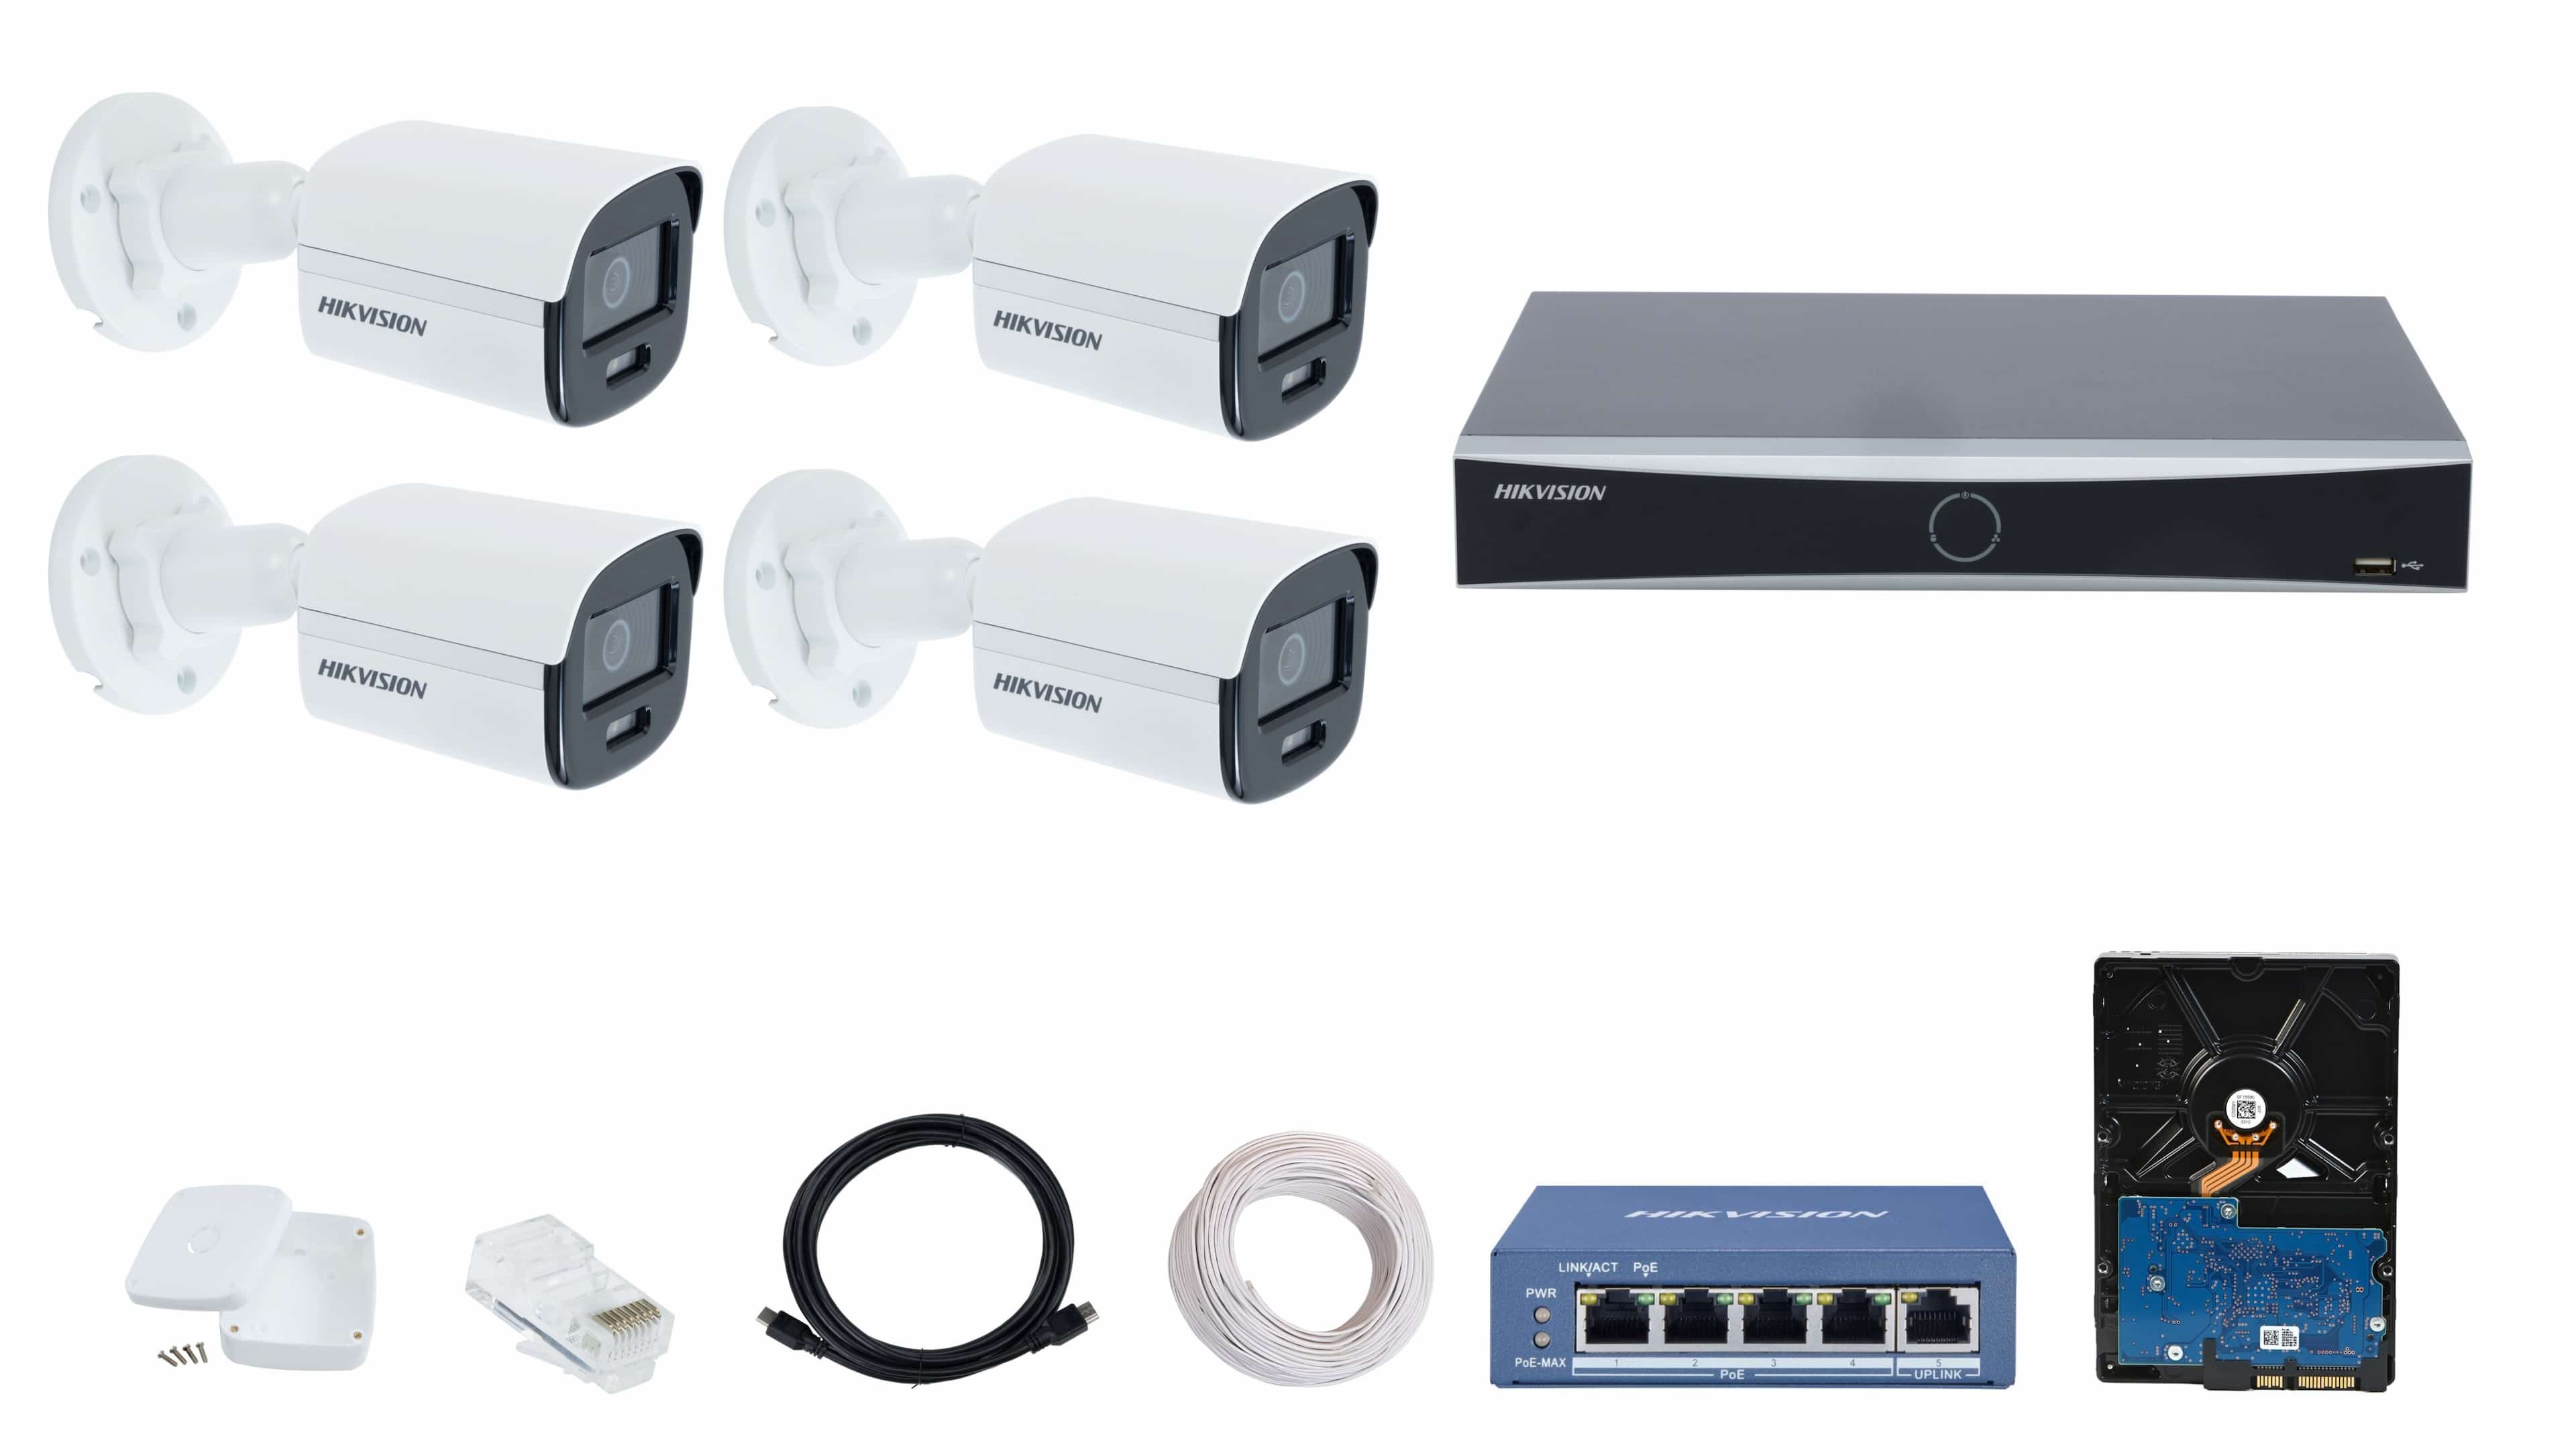 HIKVISION 4 CCTV IP Camera Full Set with 4 Channel 4K NVR, 4 × 2MP ColorVu IP Camera, 4 Port PoE Switch, 500GB HDD, RJ45, Cobox, Cat6 90m & HDMI Cable